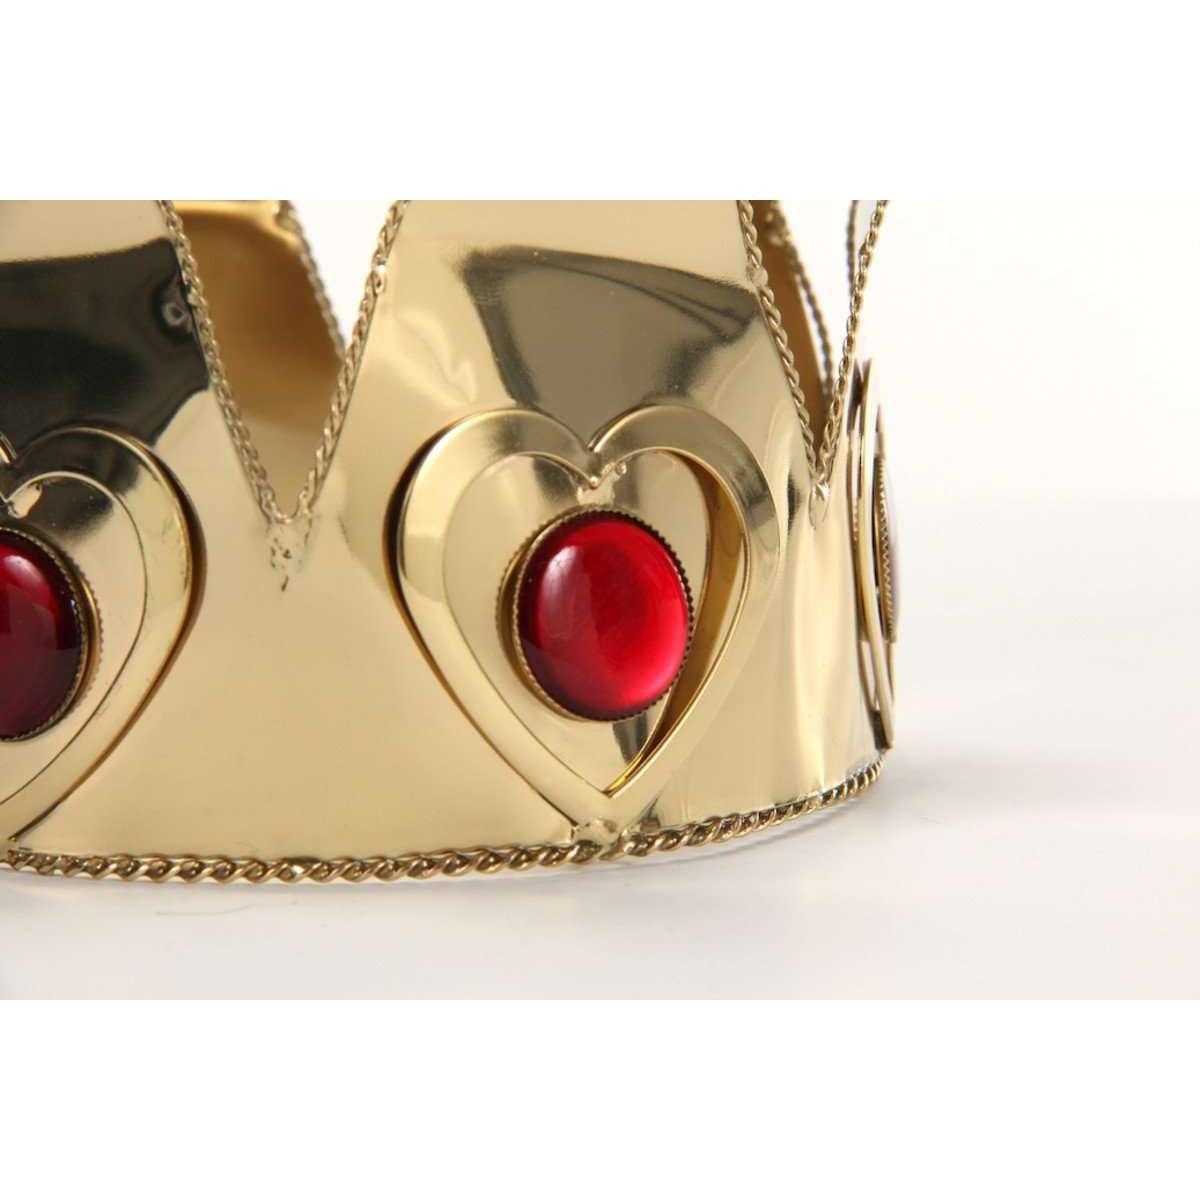 Crown Queen of Hearts Mini Gold